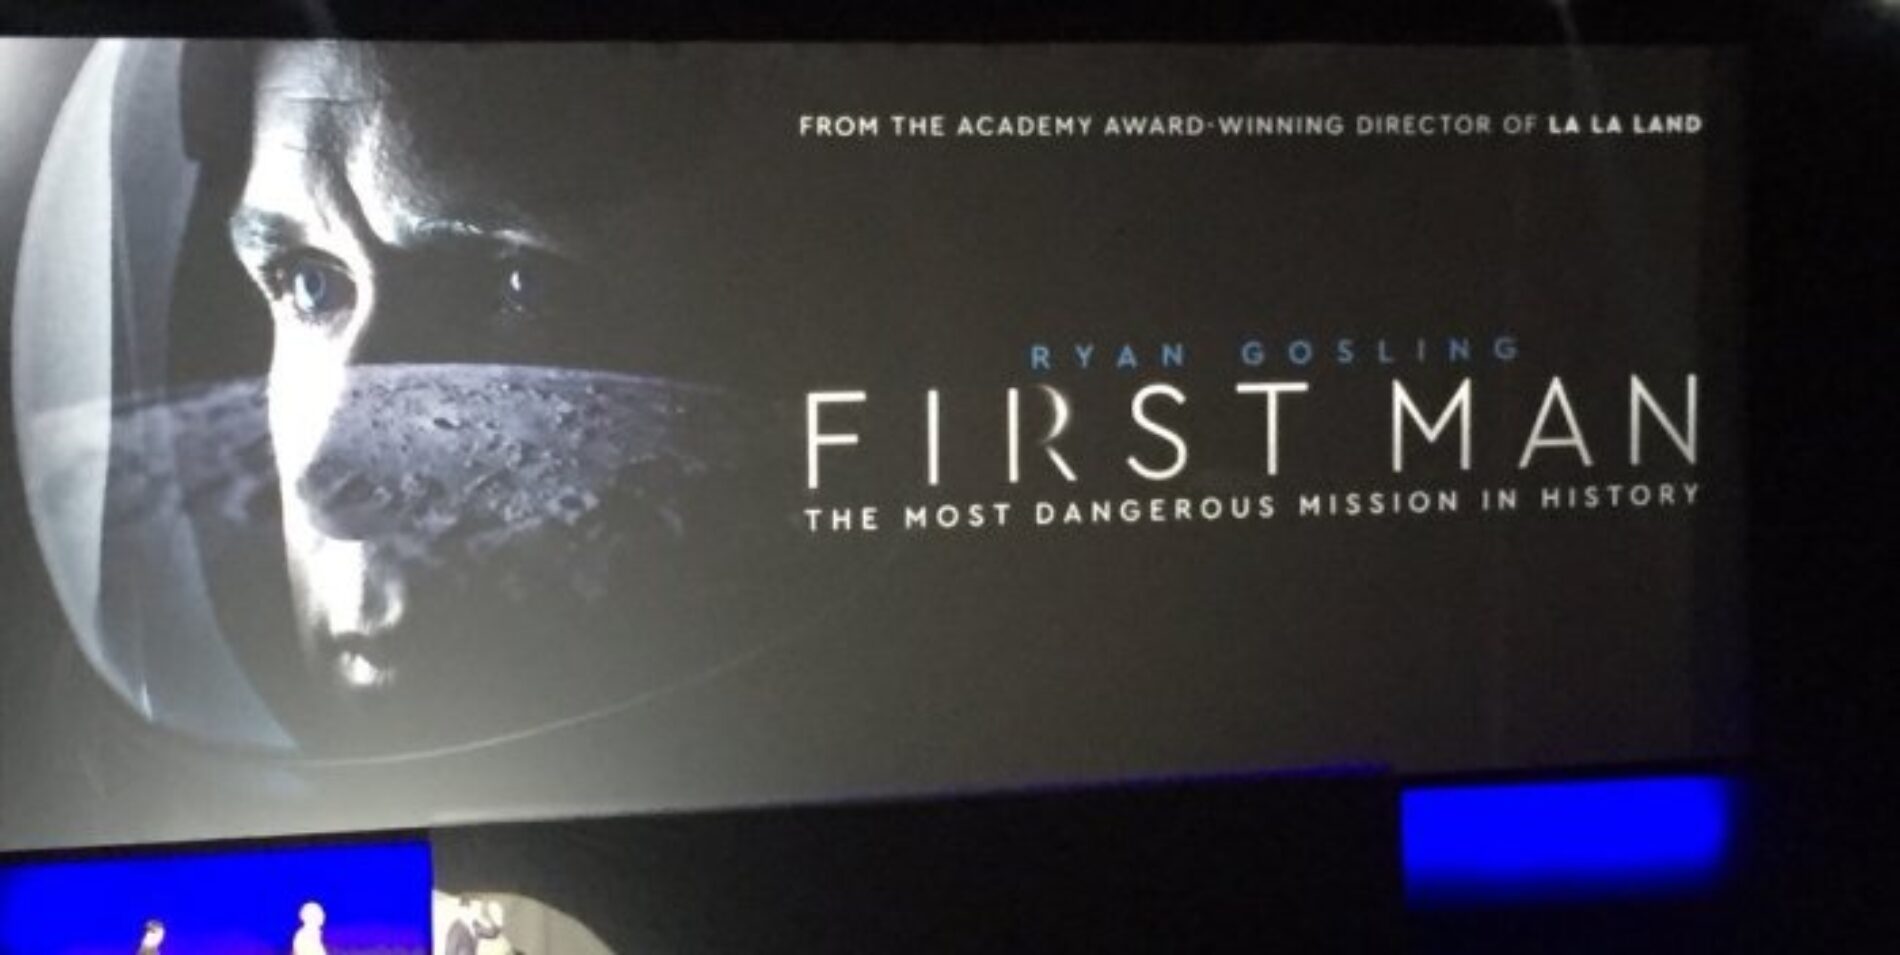 Oscar Buzz as Universal Pulls Out All Stops for “First Man” Toronto Premiere, Will Bus Guests to Theater Resembling Space Ship